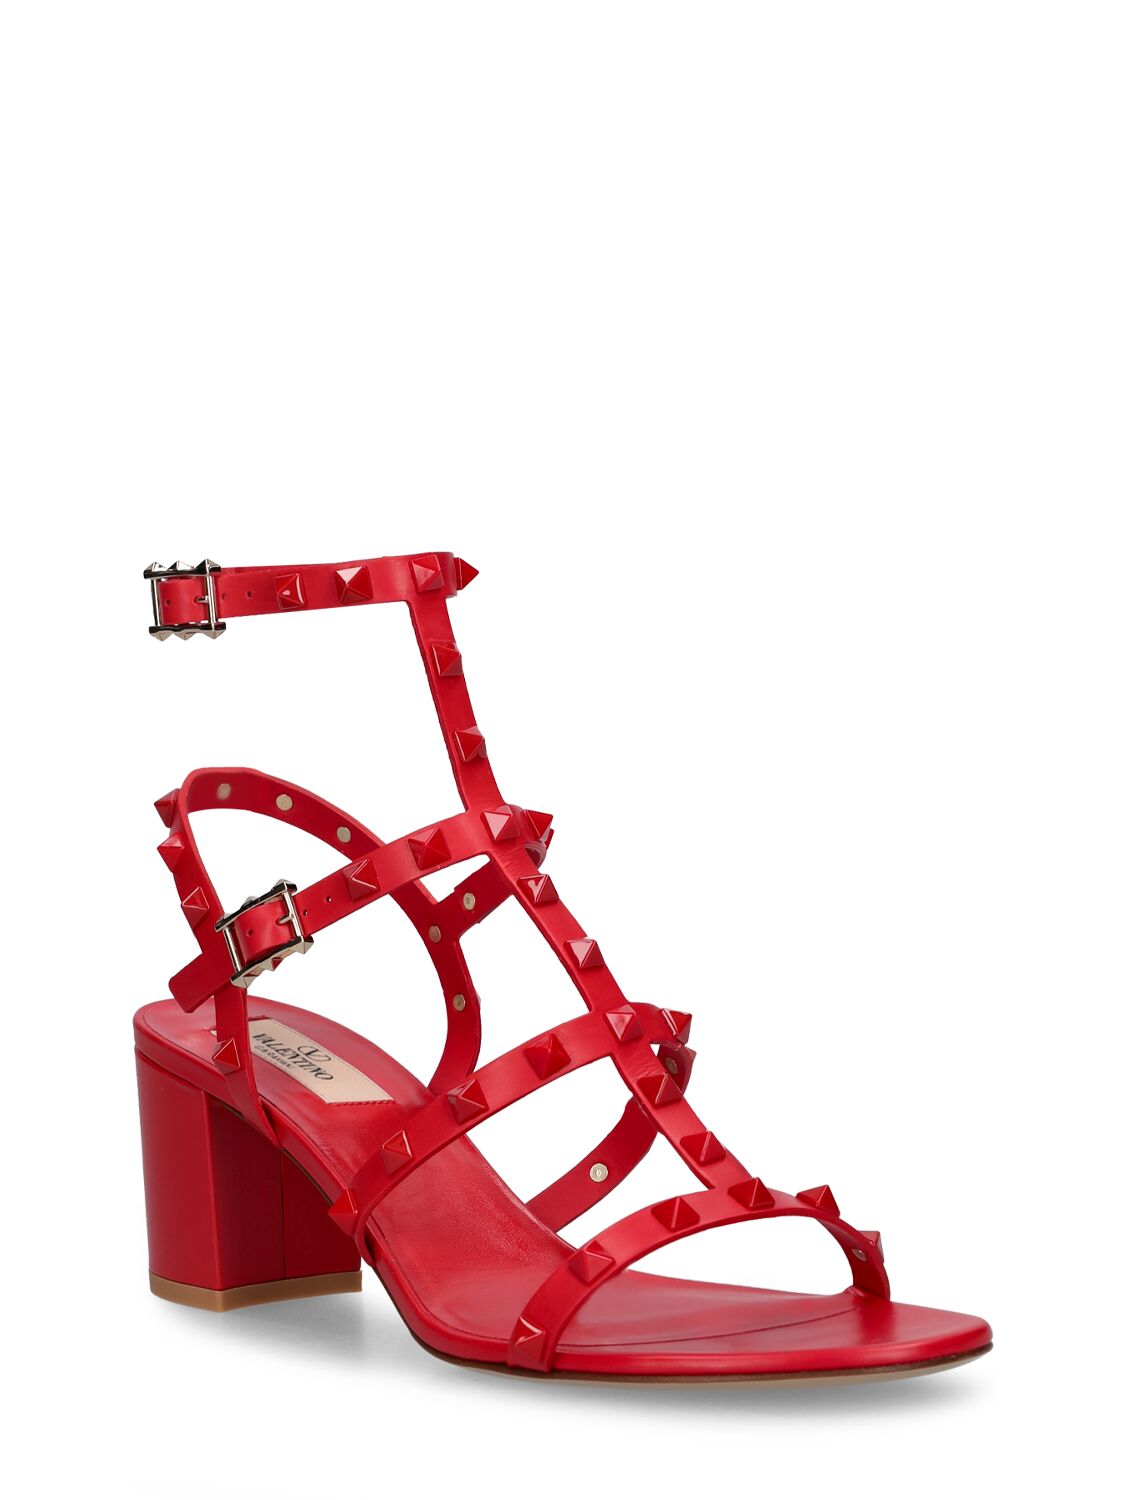 Shop Valentino 60mm Rockstud Leather Sandals In Red